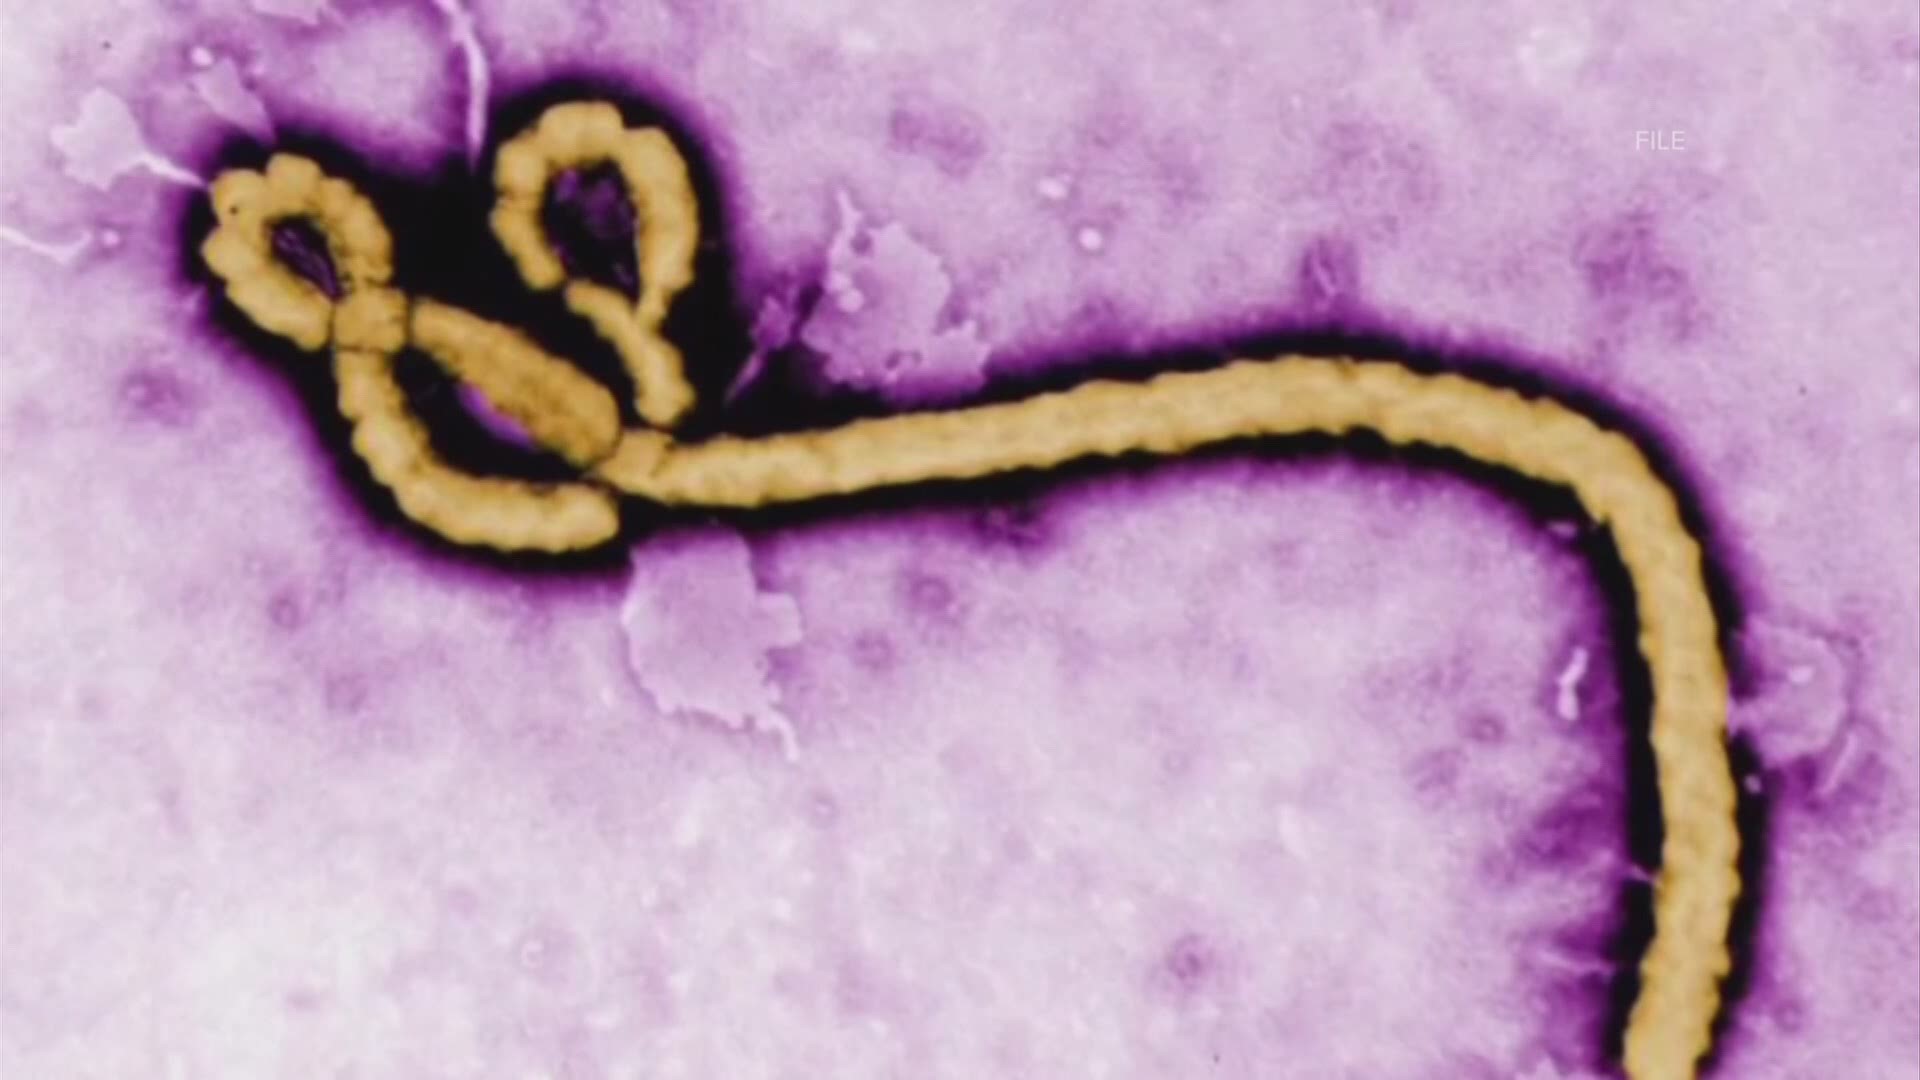 Ebola is emerging again in Central and West Africa. Should we be concerned? An OSU expert says not to panic.